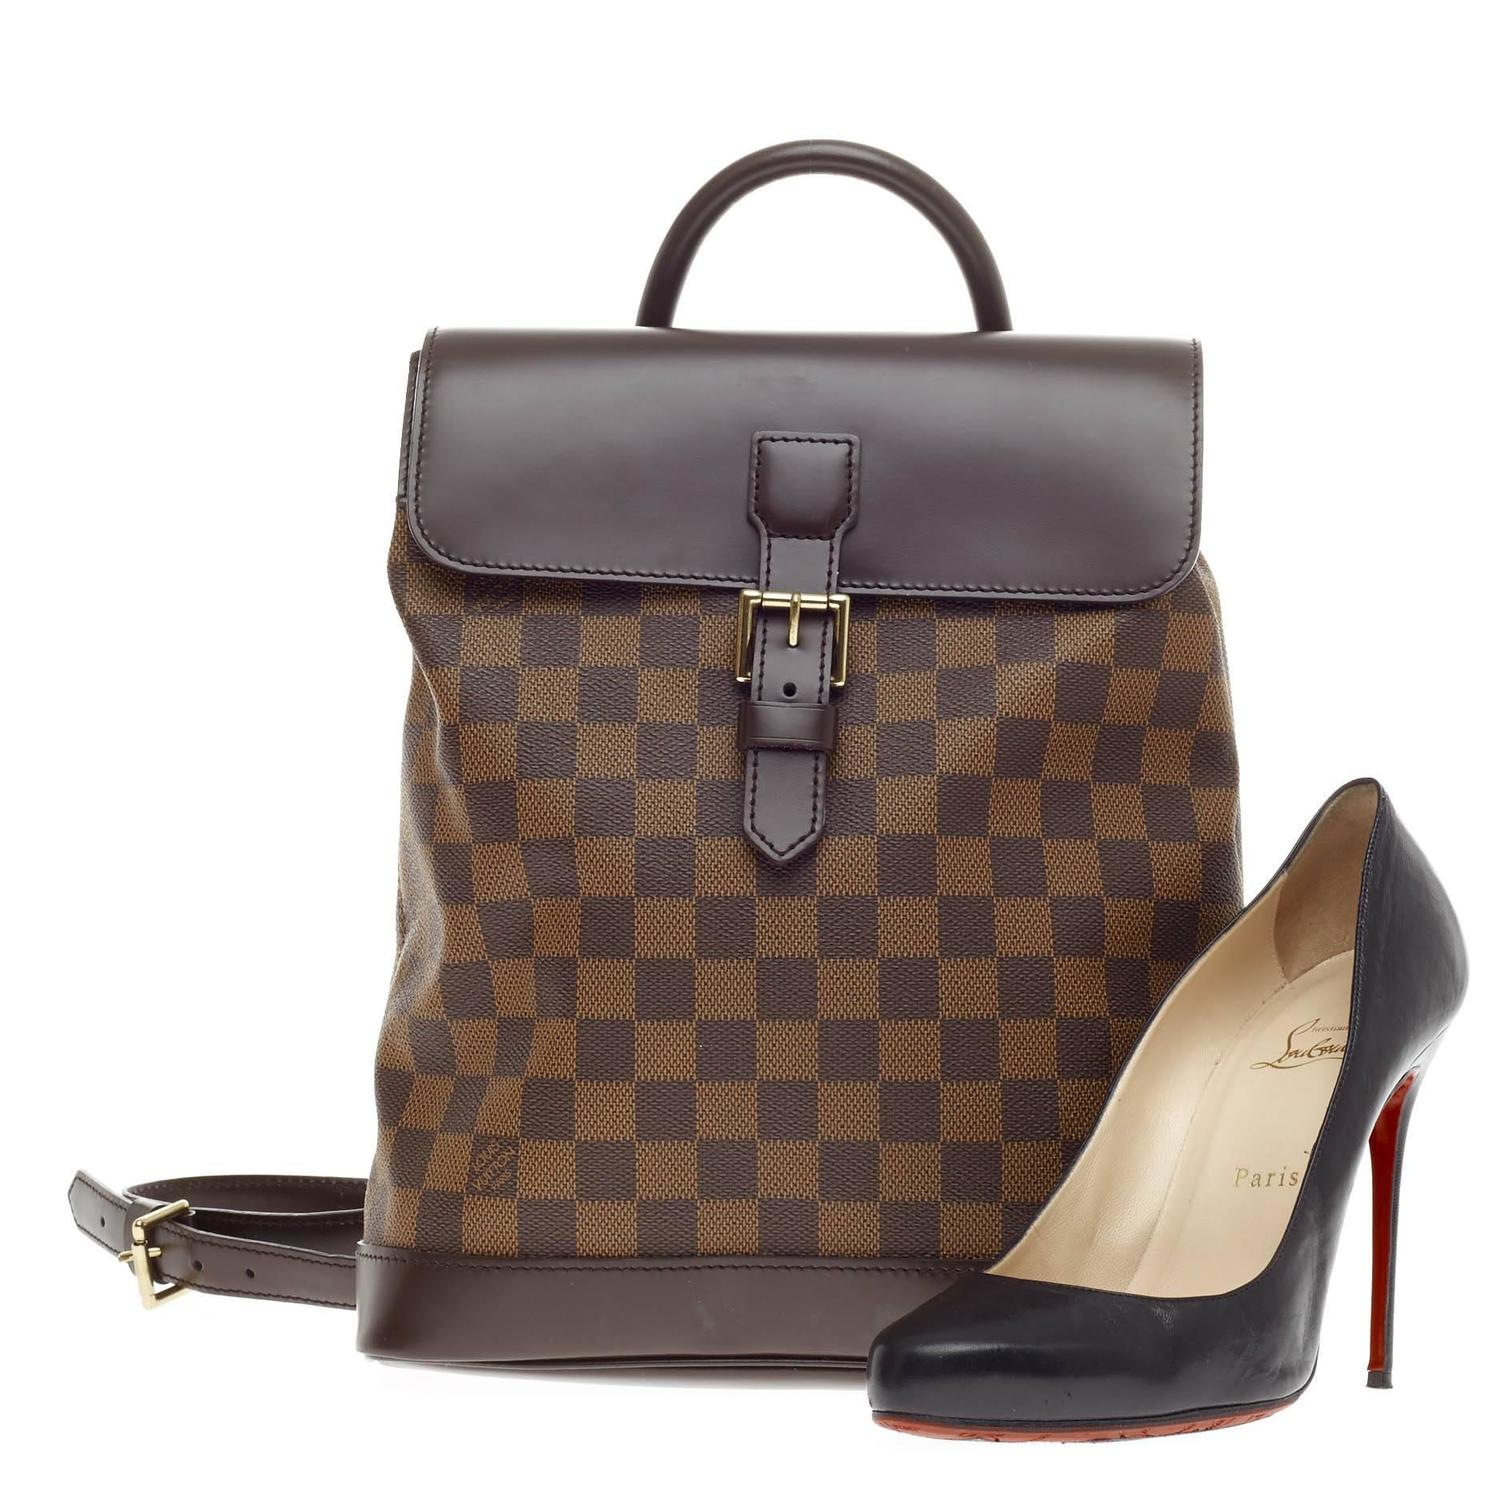 Louis Vuitton Centenaire Damier Soho Backpack | Confederated Tribes of the Umatilla Indian ...